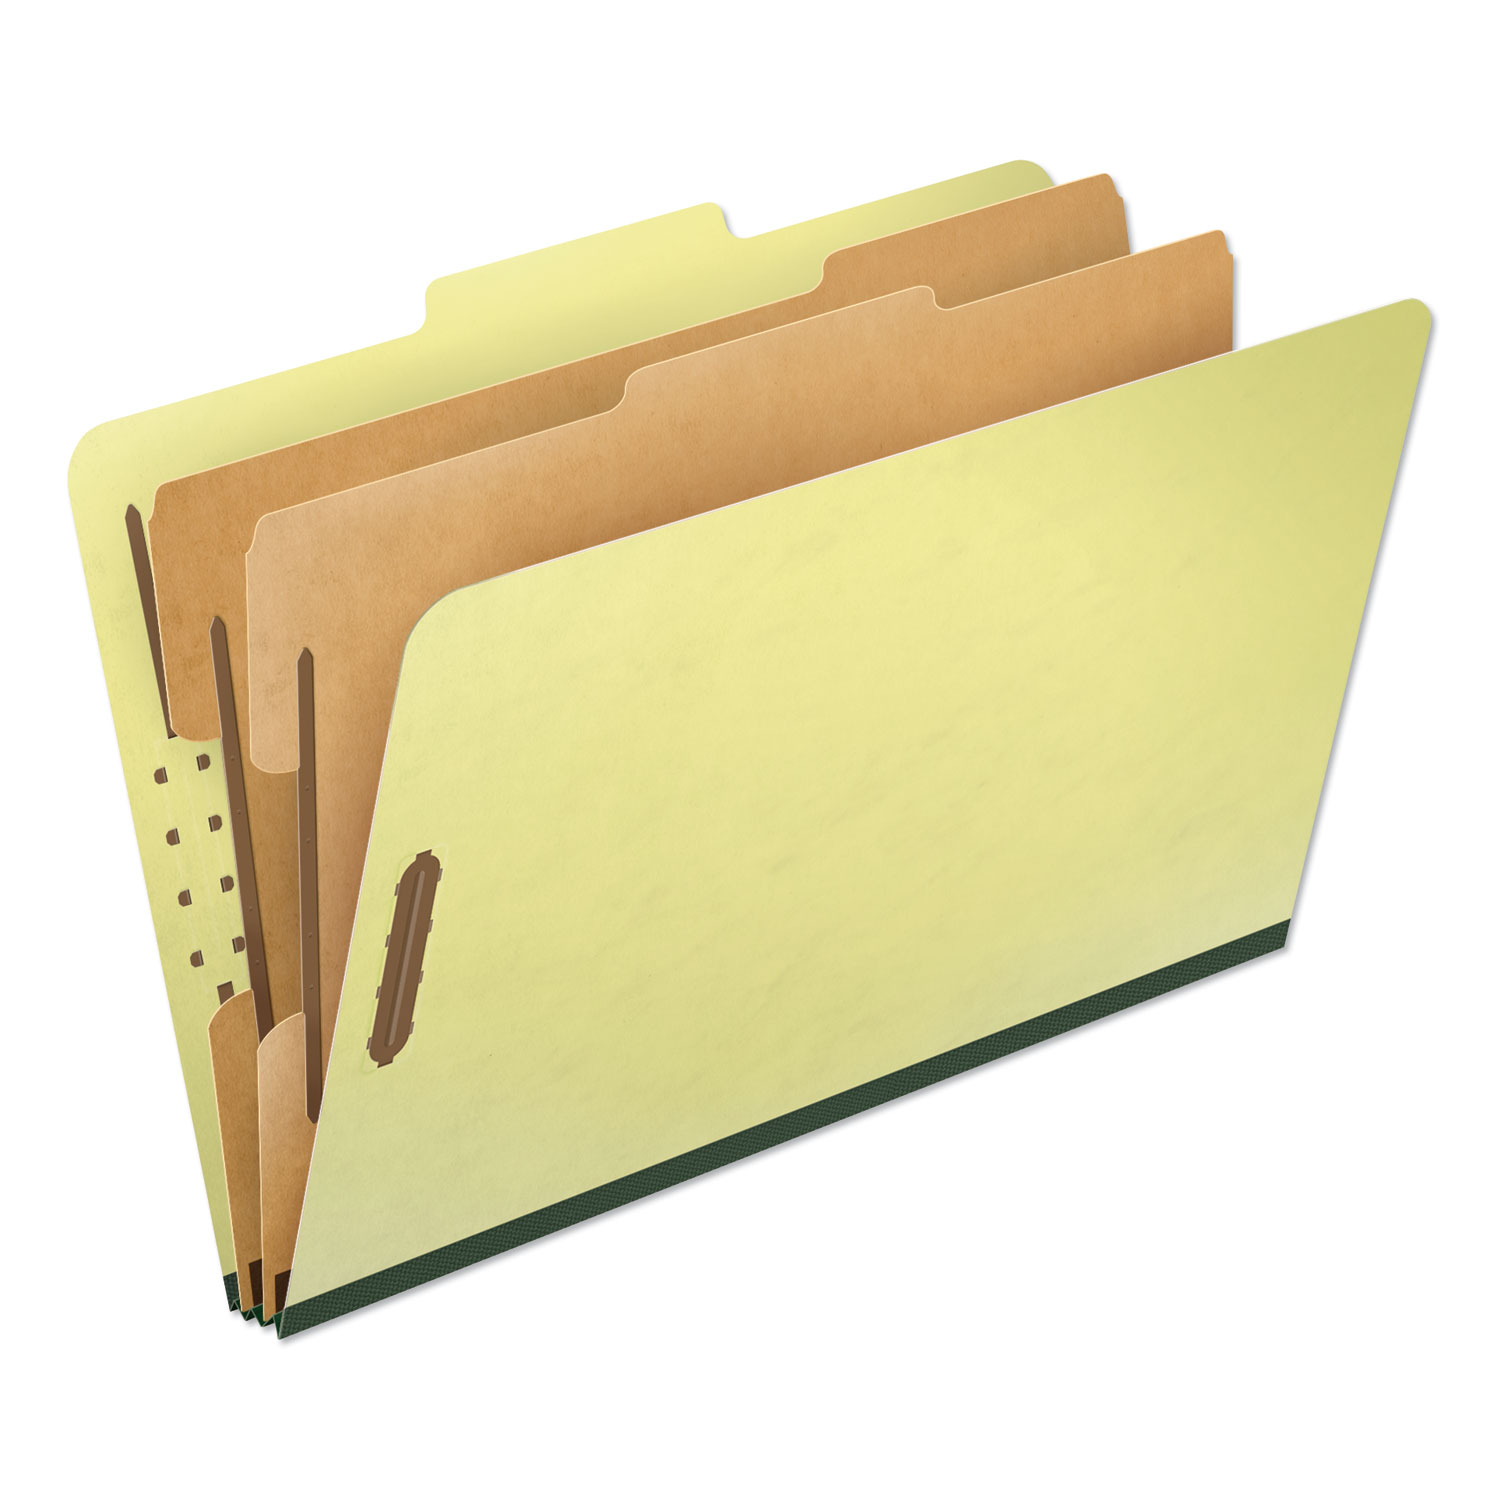  Pendaflex 2257G Four-, Six-, and Eight-Section Pressboard Classification Folders, 2 Dividers, Embedded Fasteners, Legal, Apple Green, 10/Box (PFX2257G) 